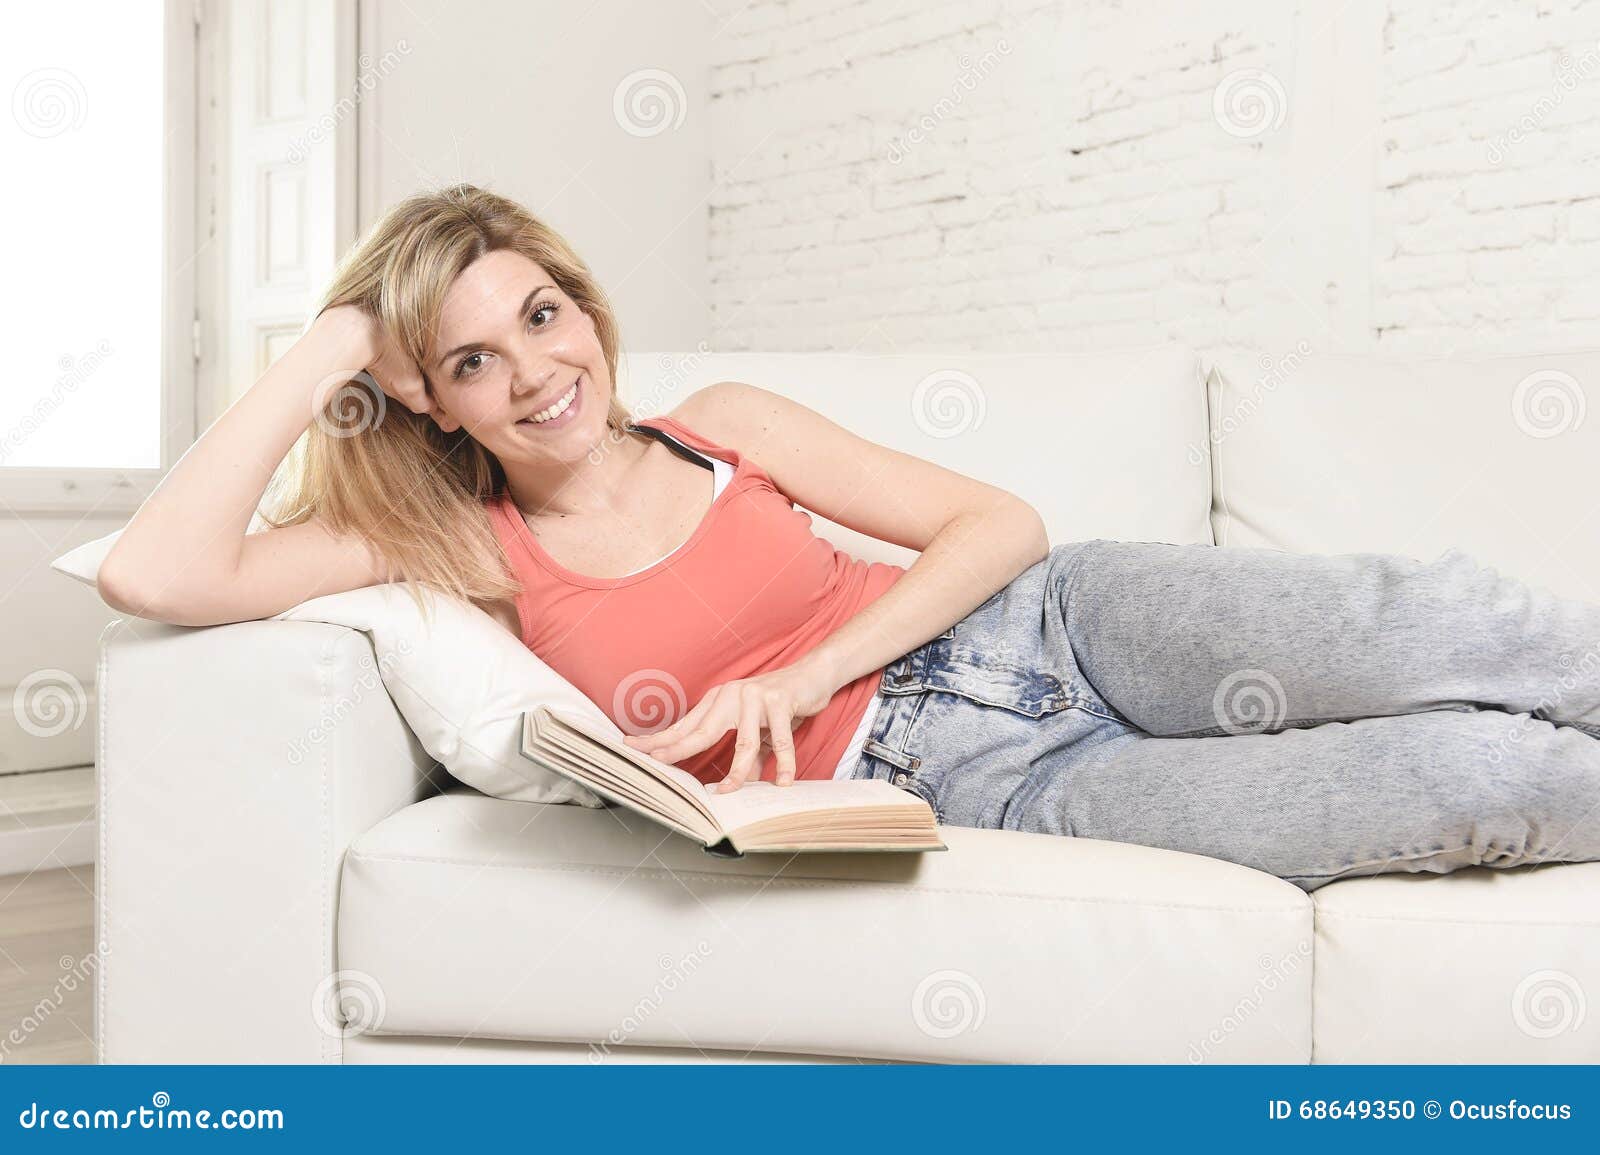 young beautiful caucasian woman reading book studying lying comfortable on home sofa looking happy